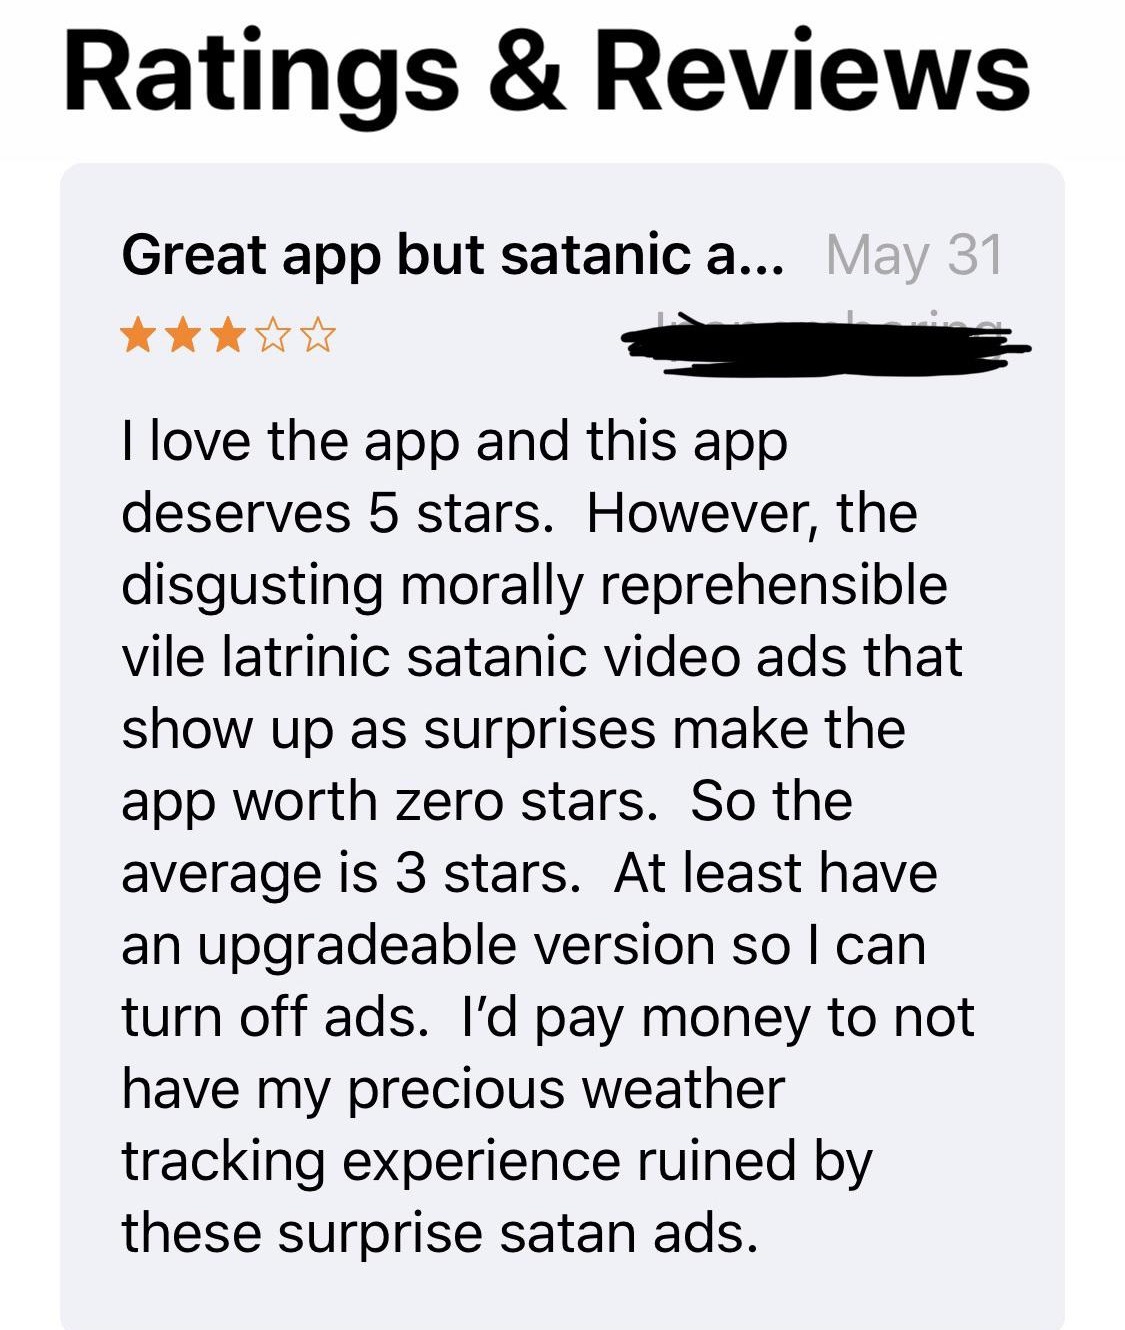 hollingsworth & vose - Ratings & Reviews Great app but satanic a... May 31 I love the app and this app deserves 5 stars. However, the disgusting morally reprehensible vile latrinic satanic video ads that show up as surprises make the app worth zero stars.